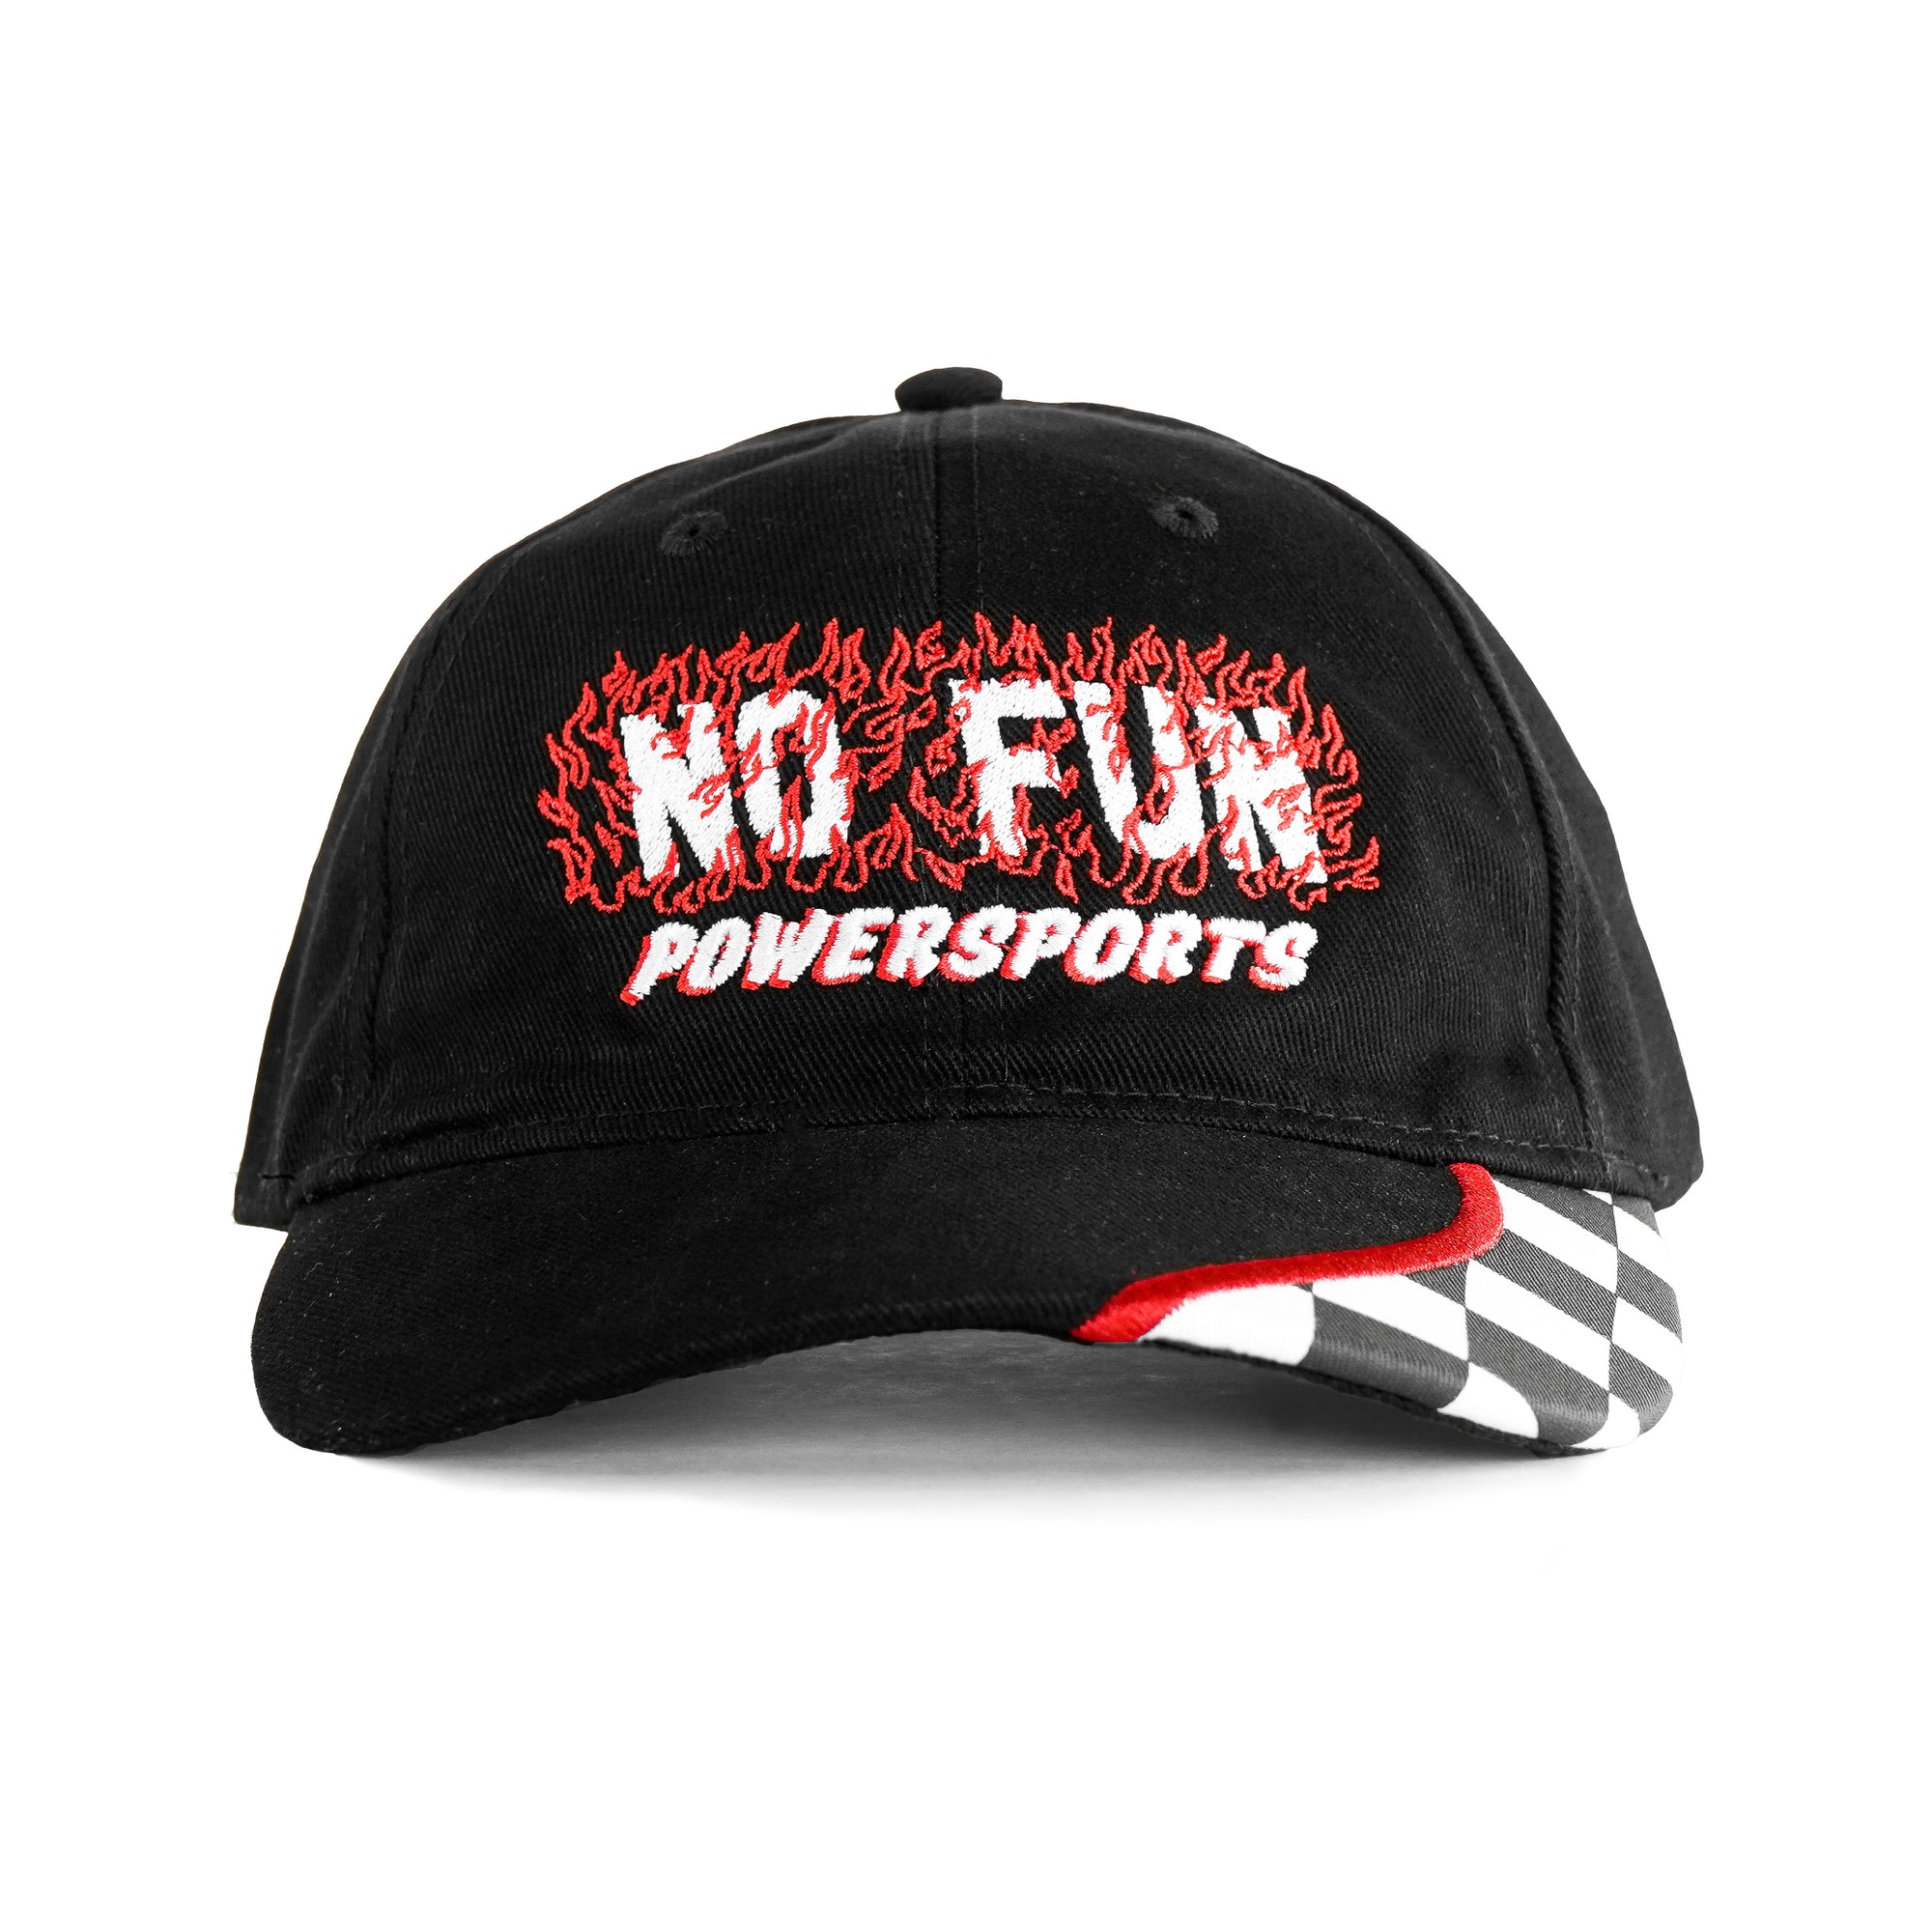 The "Speed" Hat in Tar Black by No Fun®. The baseball style hat is black, with a black, white, and red checkerboard detail on the brim. The text "No Fun® Powersports" is embroidered on the front in white, surrounded by red embroidery flames.